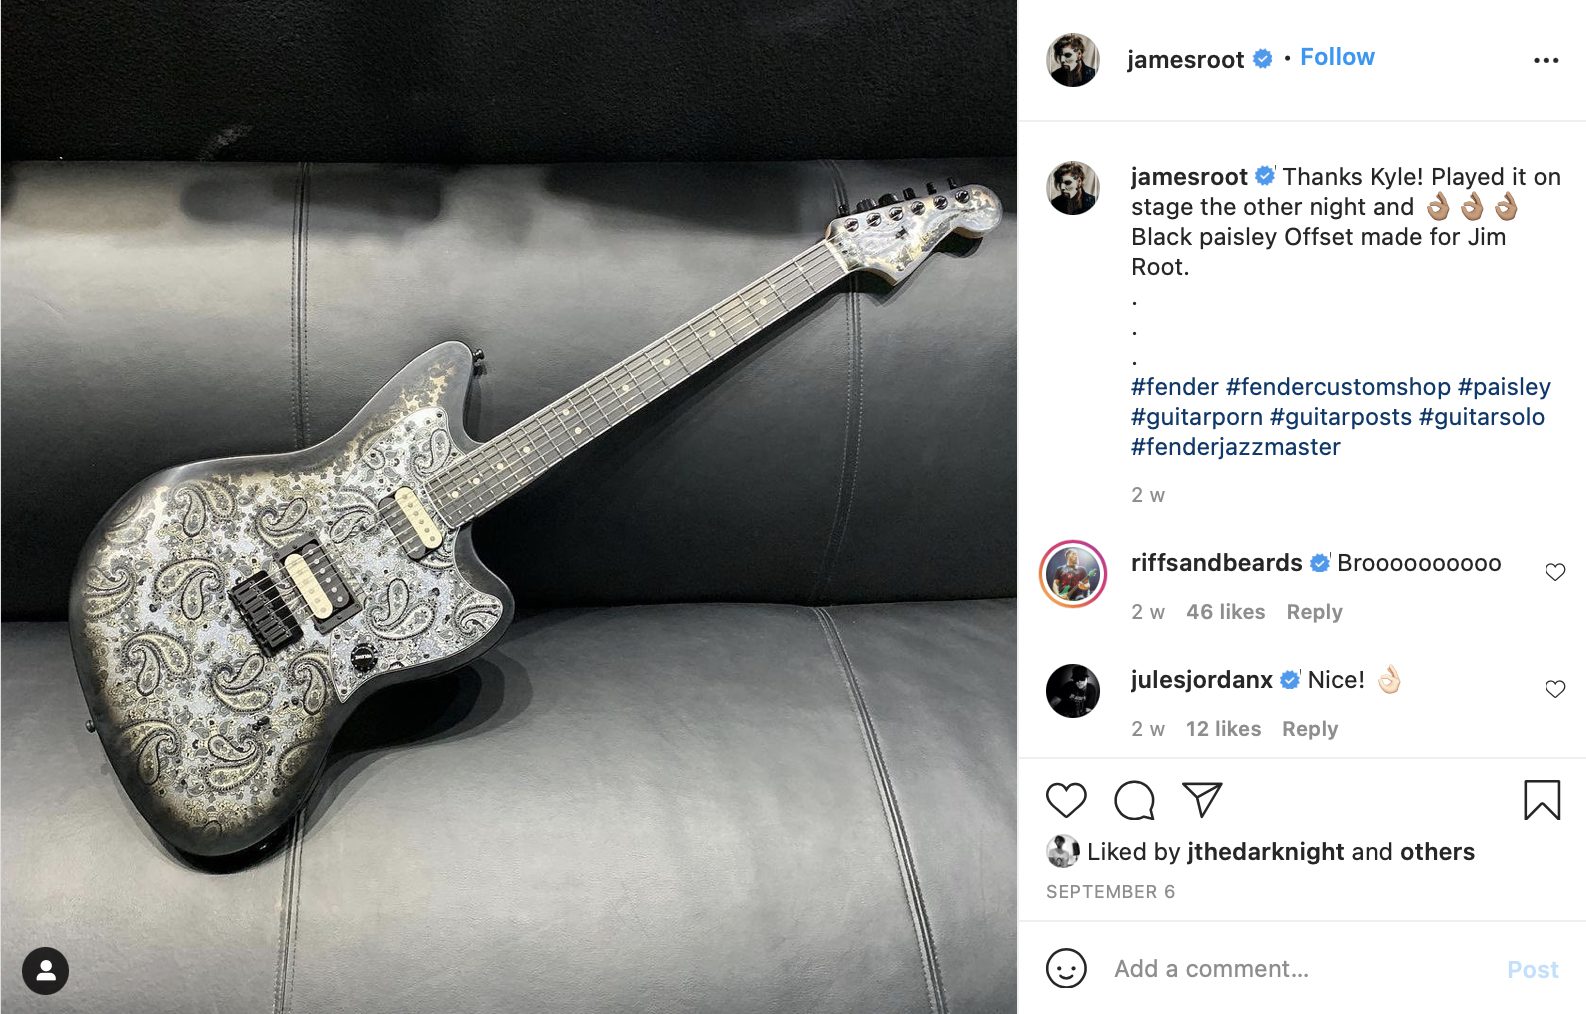 Jim Root shares photos of his new Black Paisley offset